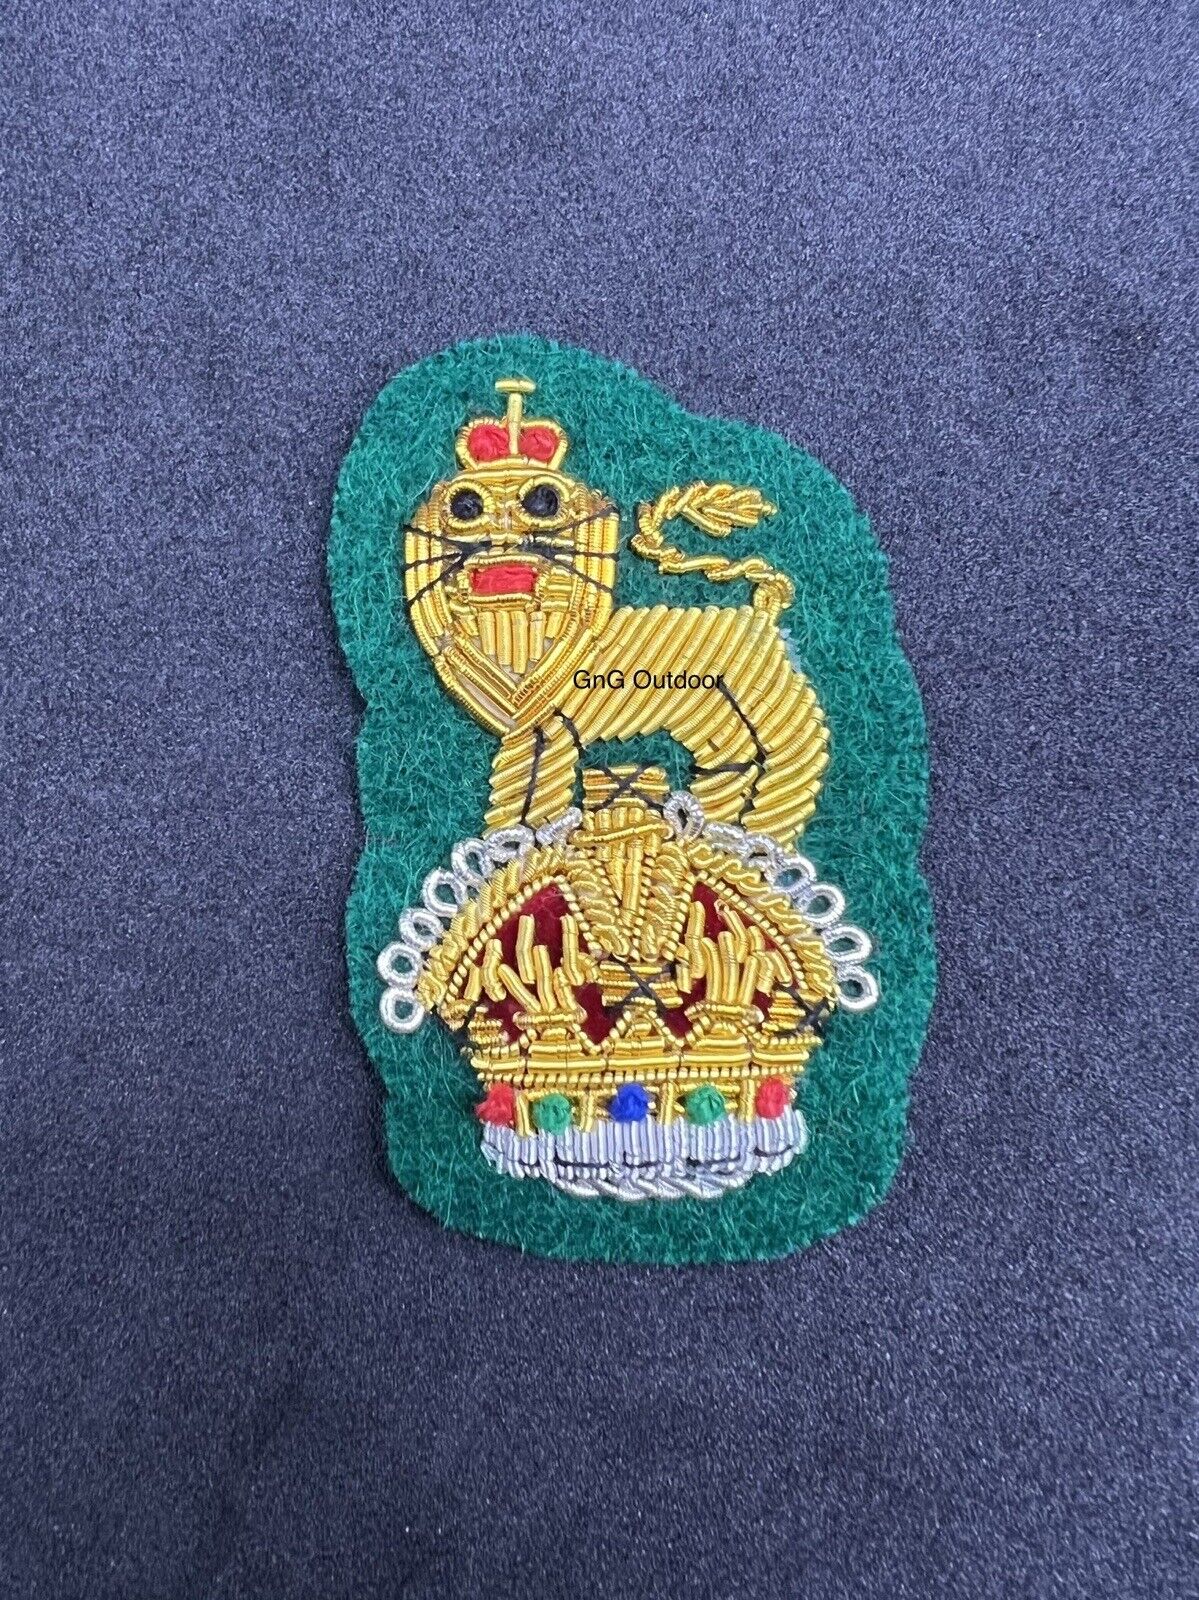 King’s Crown General Staff Officer Beret Badge Embroidered Bullion Wire ...